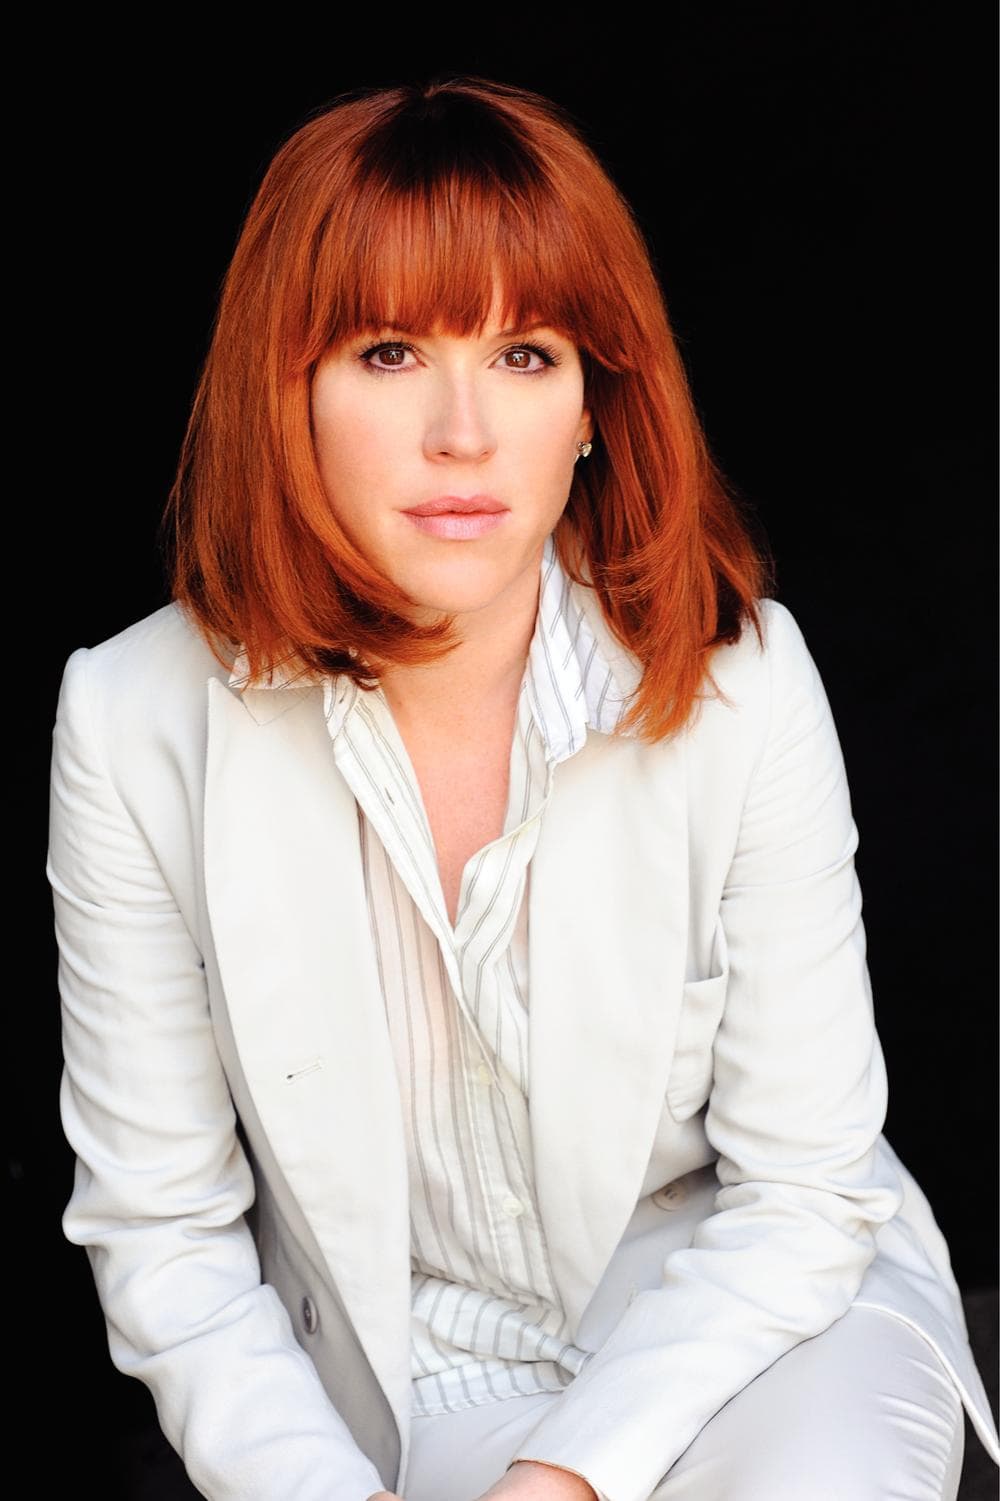 Actress and author Molly Ringwald. (Photo: Fergus Greer)